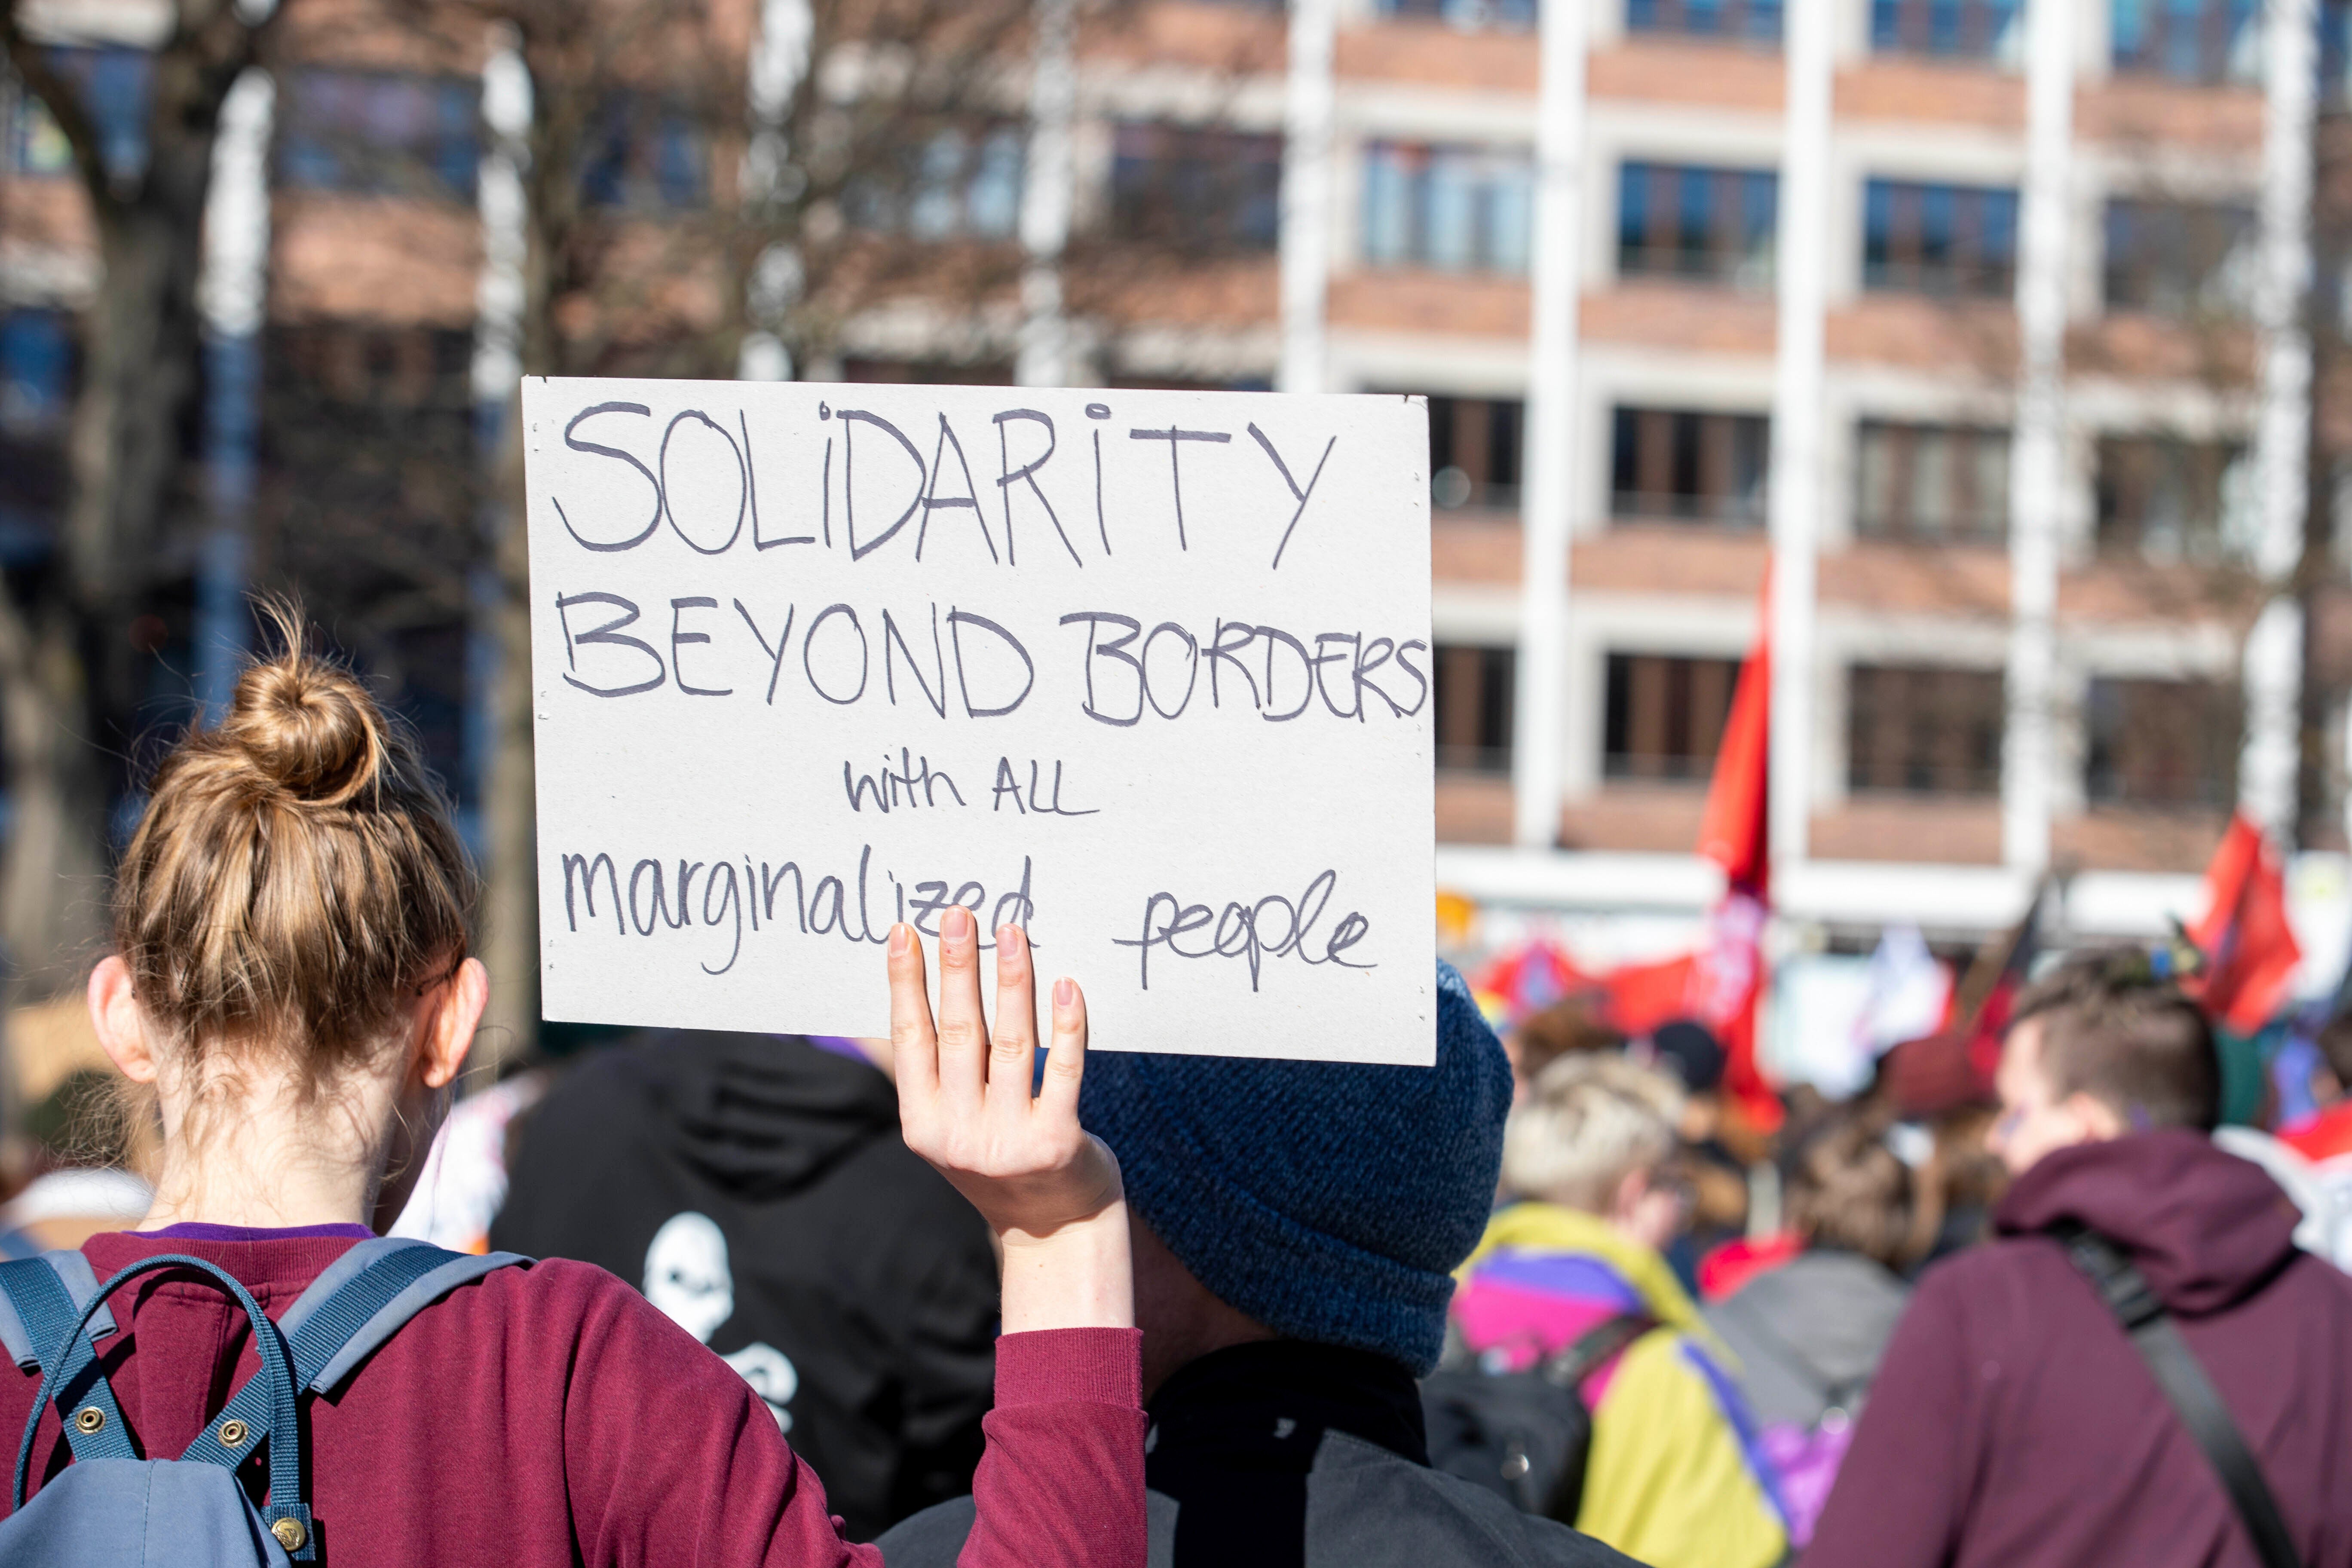 A participant at a feminist protest on international women’s day in Munich, Germany on 8 March 2020.